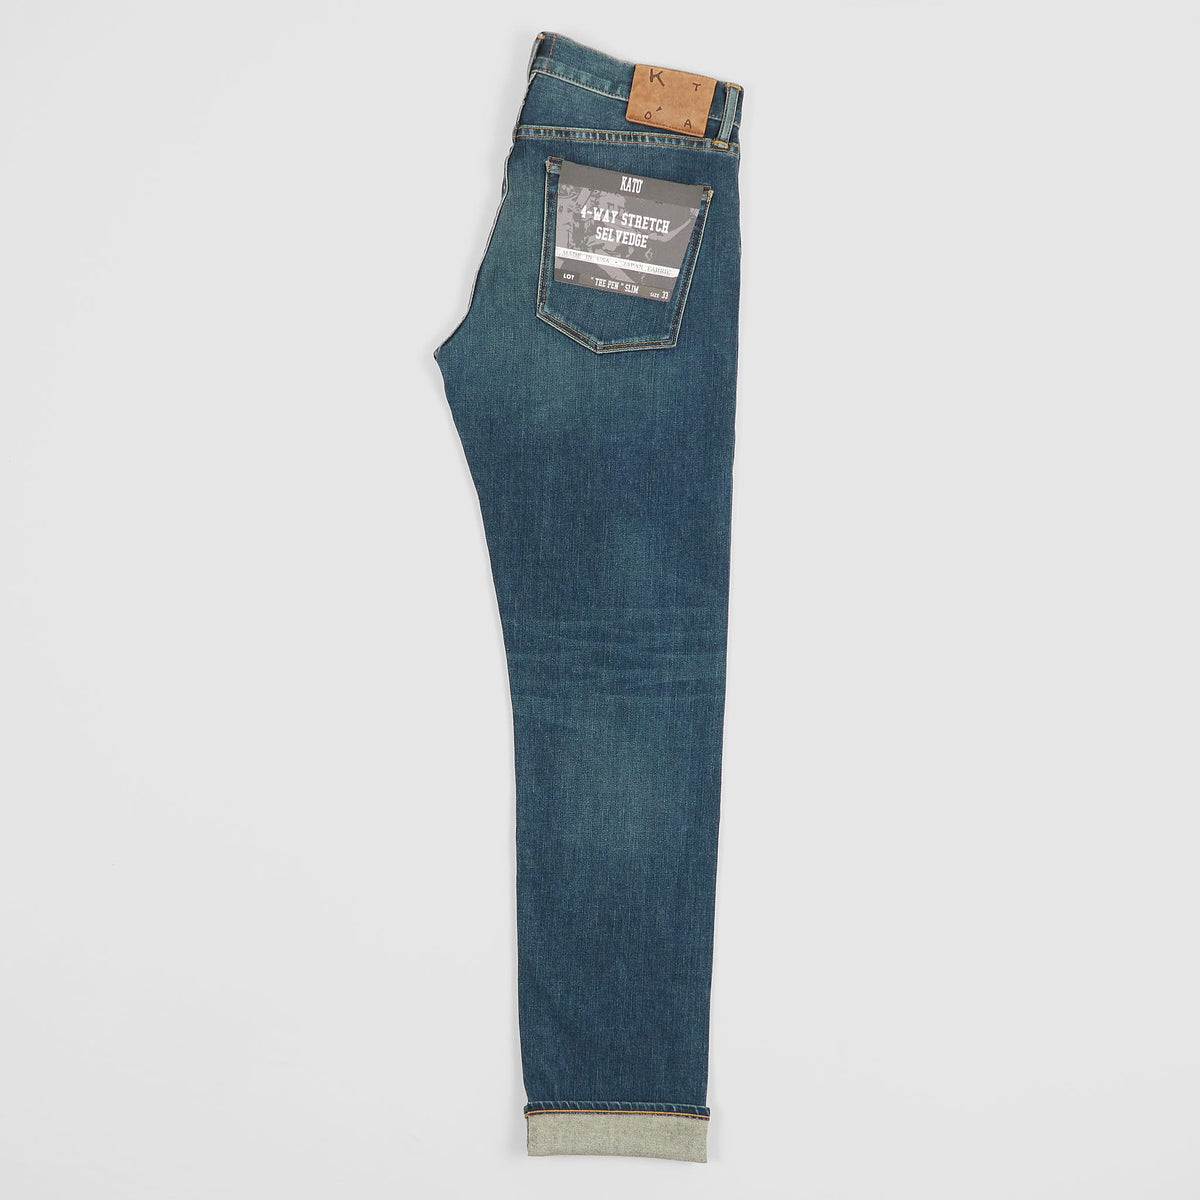 Hiroshi Kato The Pen Zip Fly Selvage Denim Classic Fit